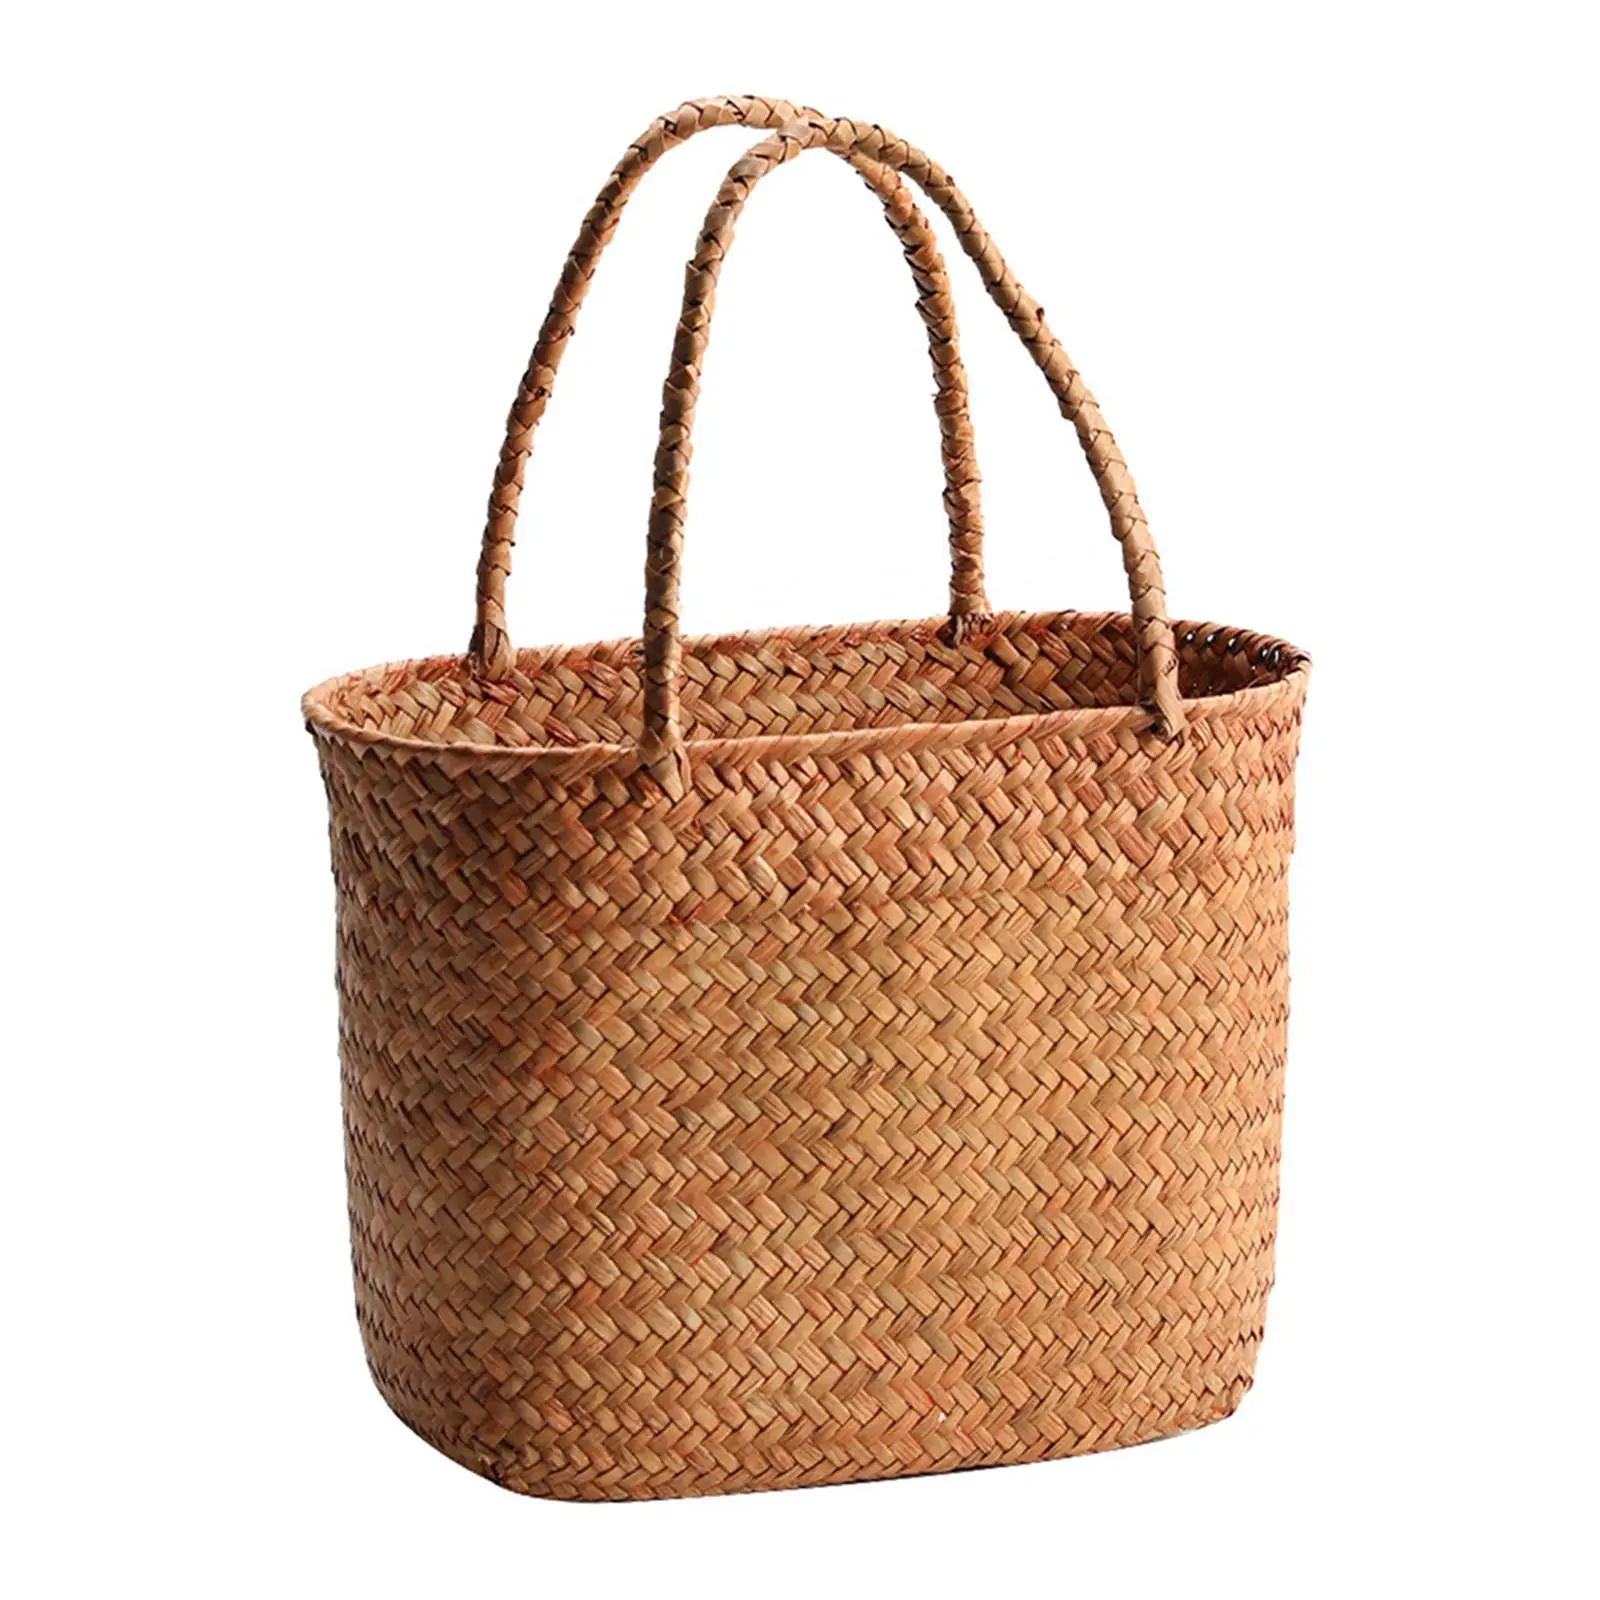 Outdoor Picnic Basket Picnic Hamper Woven Grocery Baskets Double Handles Shopping Basket for Hiking Beach Camping Outdoor